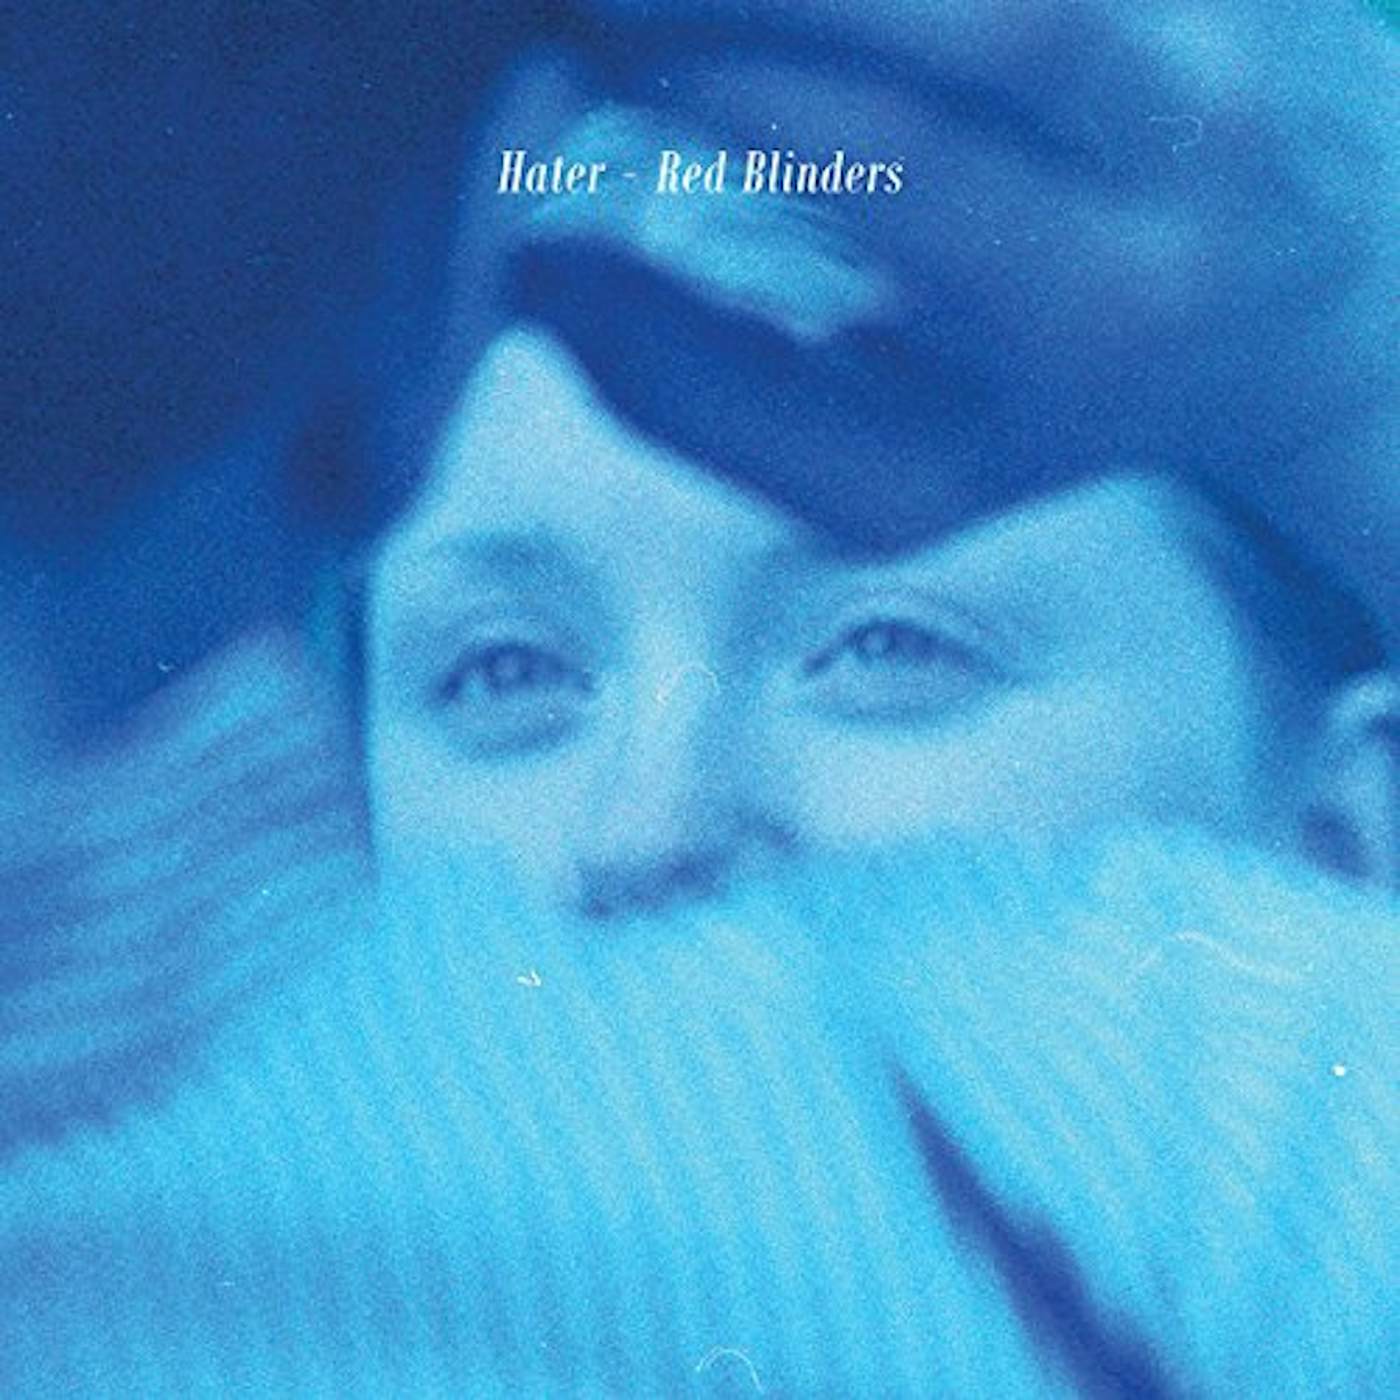 Hater RED BLINDERS CD